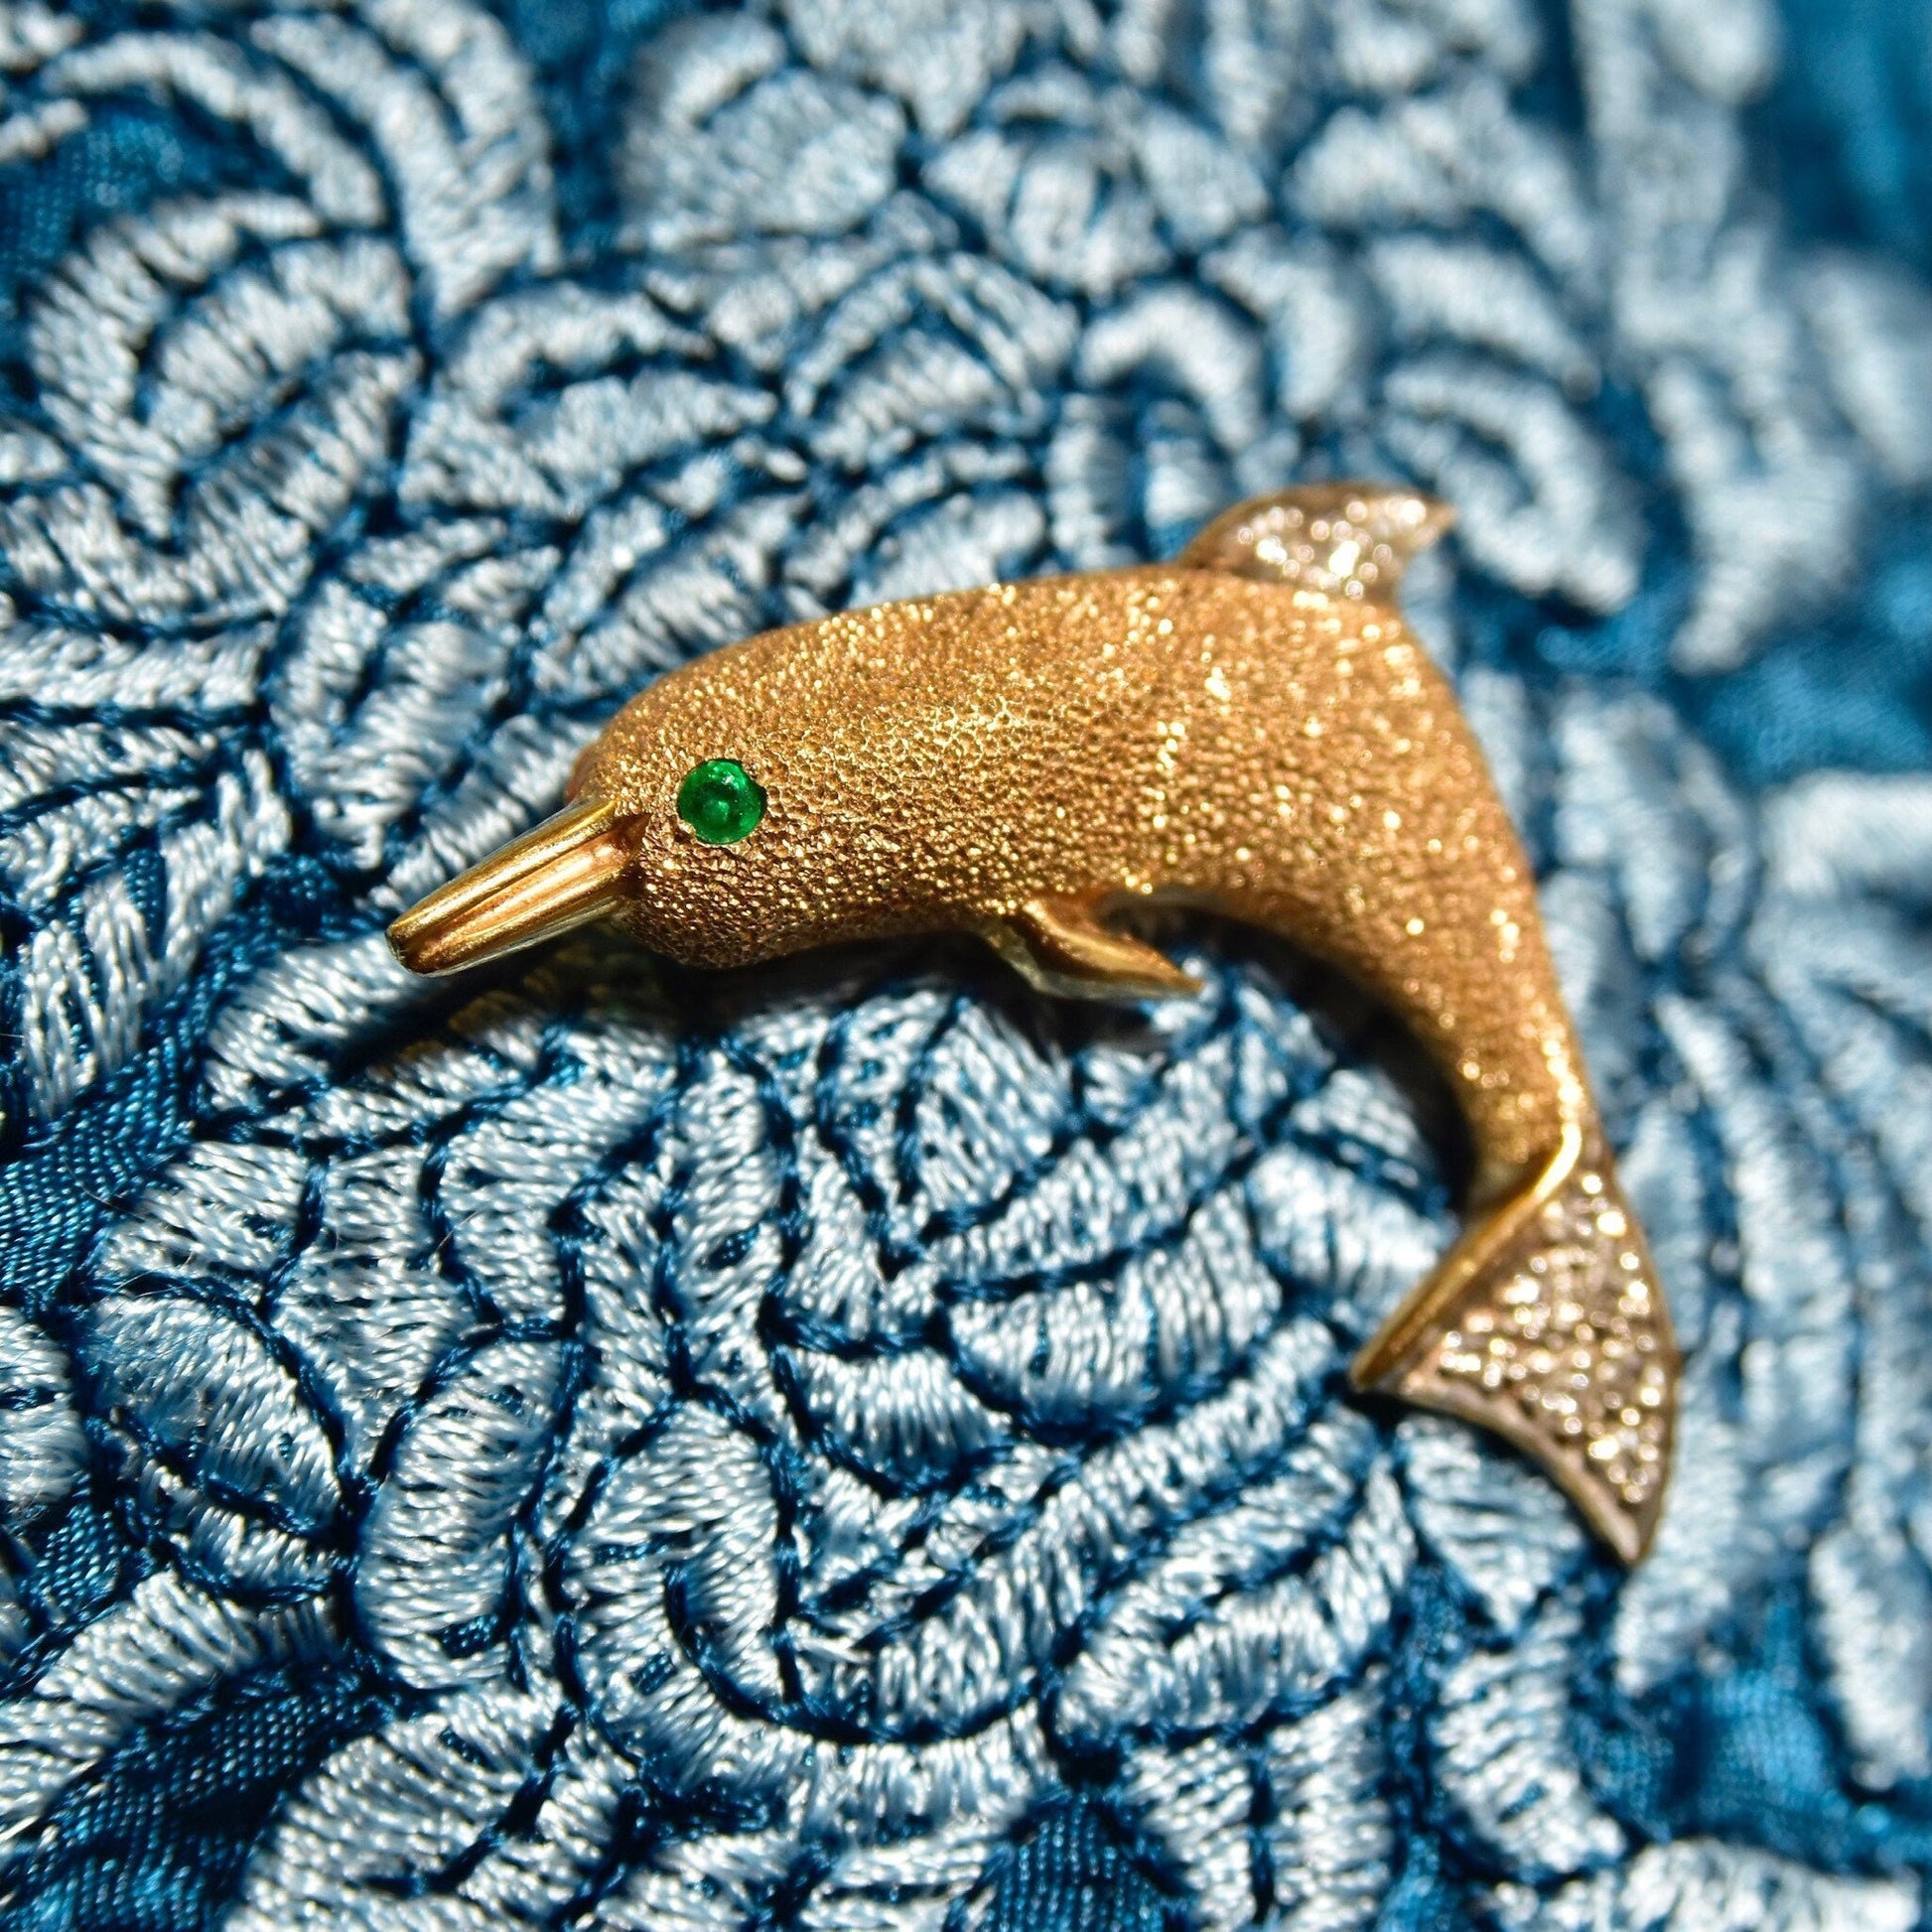 Vintage 14KP Gold Diamond Accent Dolphin Brooch/Pendant, Green Emerald Eye, Textured Yellow Gold Finish, Diamond Encrusted Fin/Tail, 1 3/8" - Good's Vintage